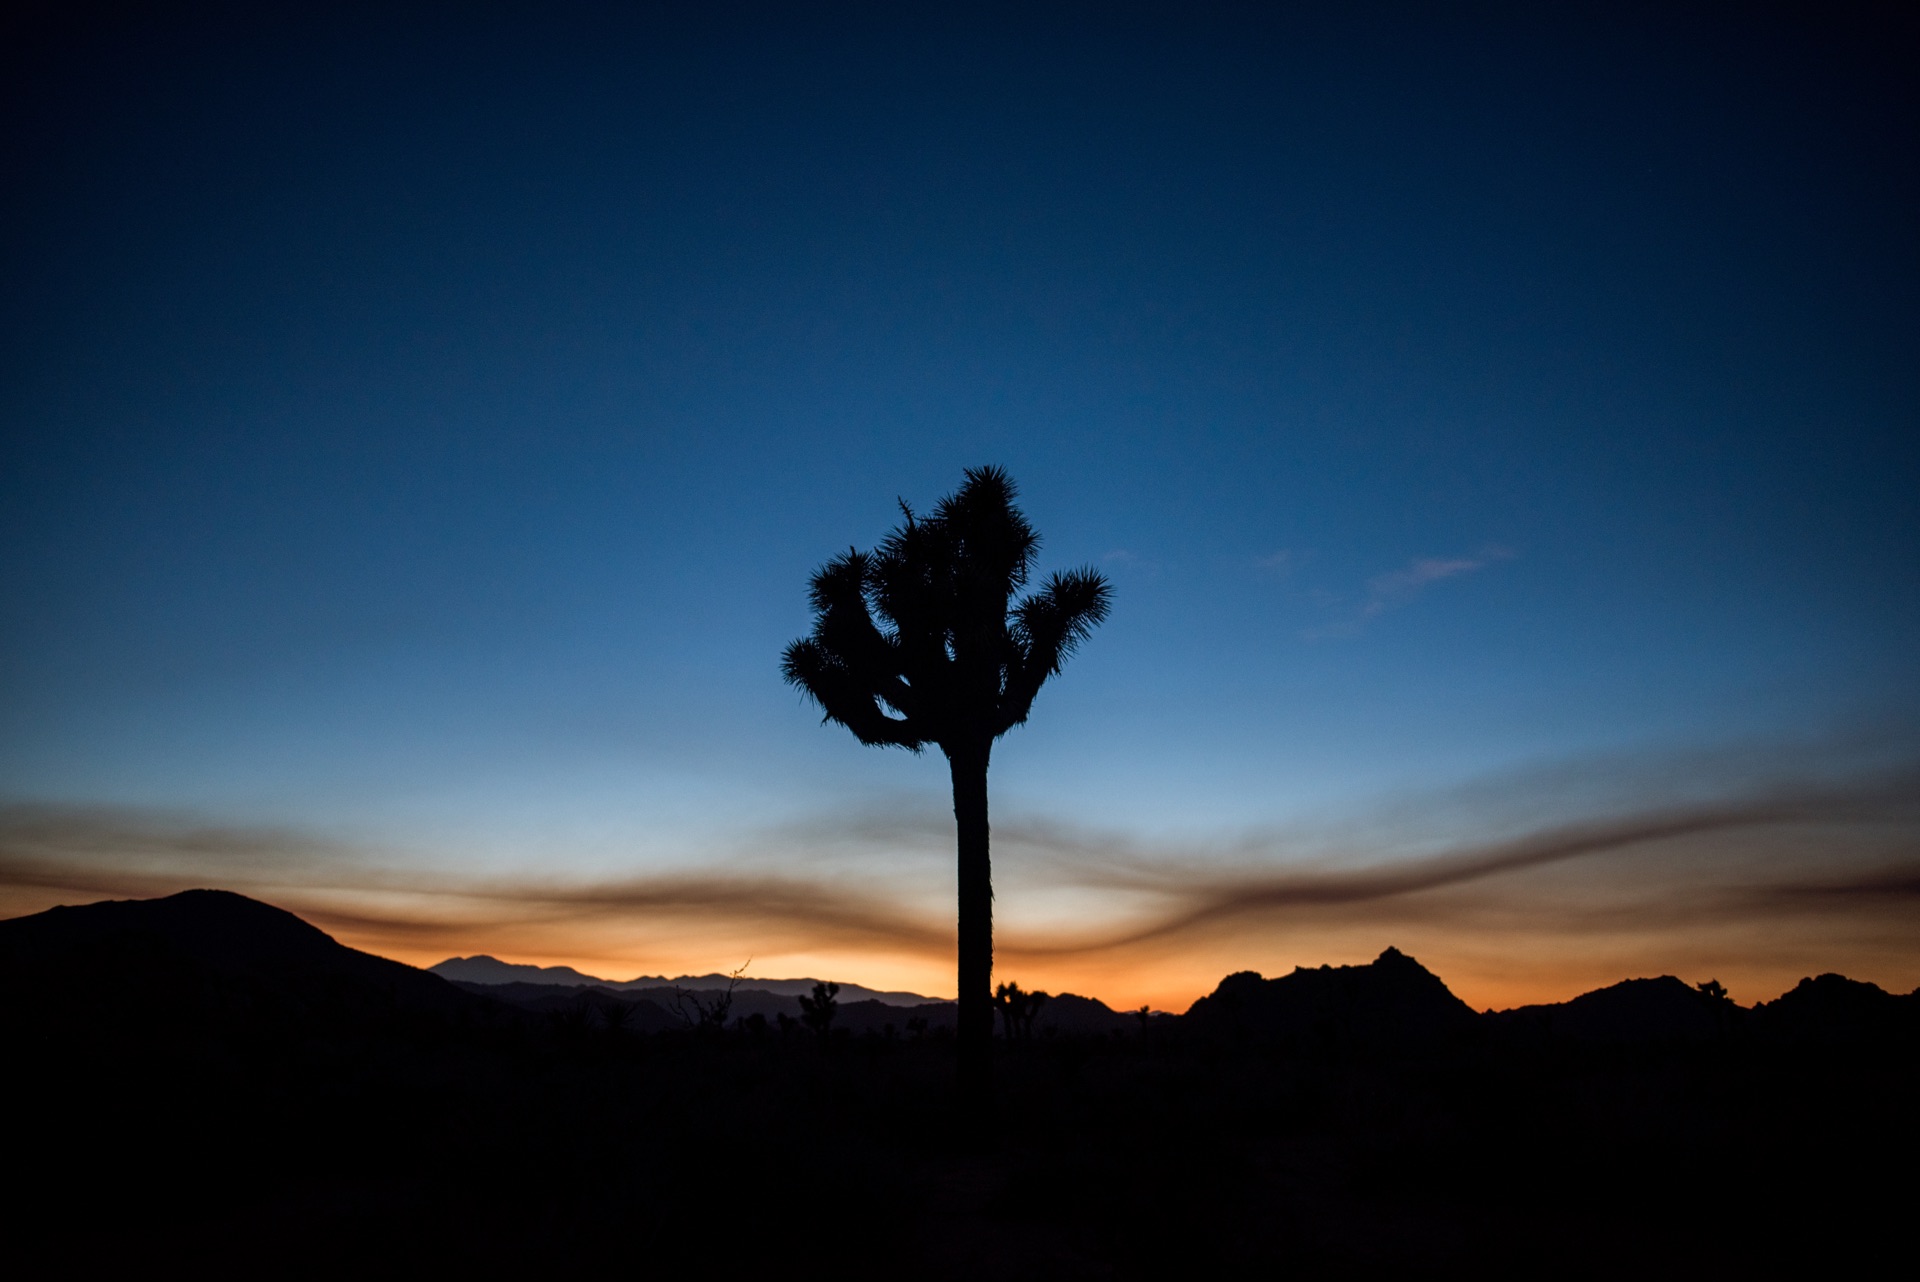 Silhouette of palm tree at sunset with mountains in the background